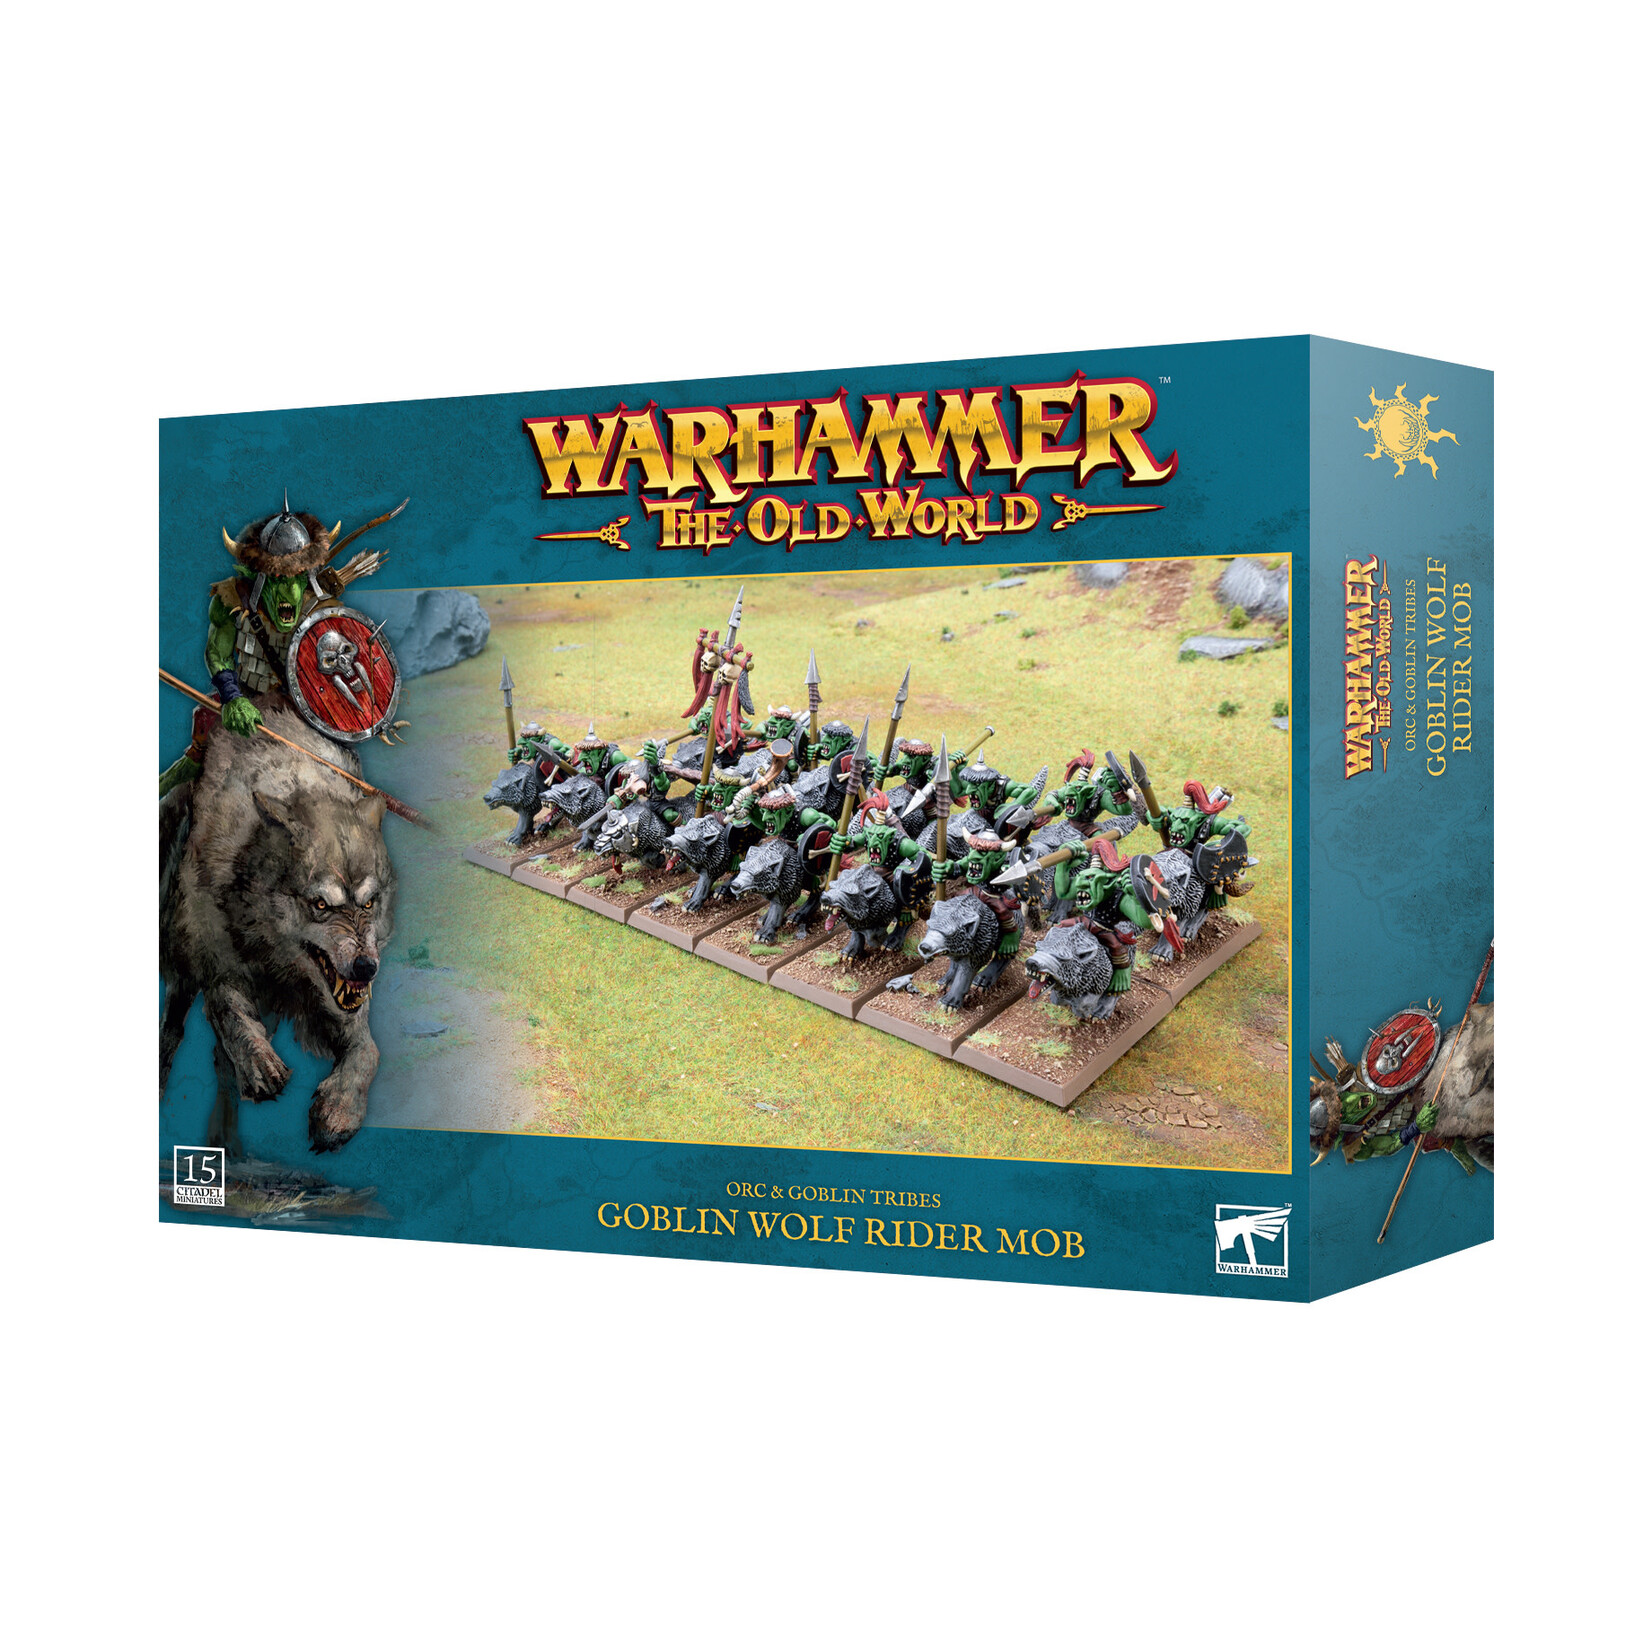 Games Workshop Warhammer The Old World Orc and Goblin Tribes Goblin Wolf Rider Mob